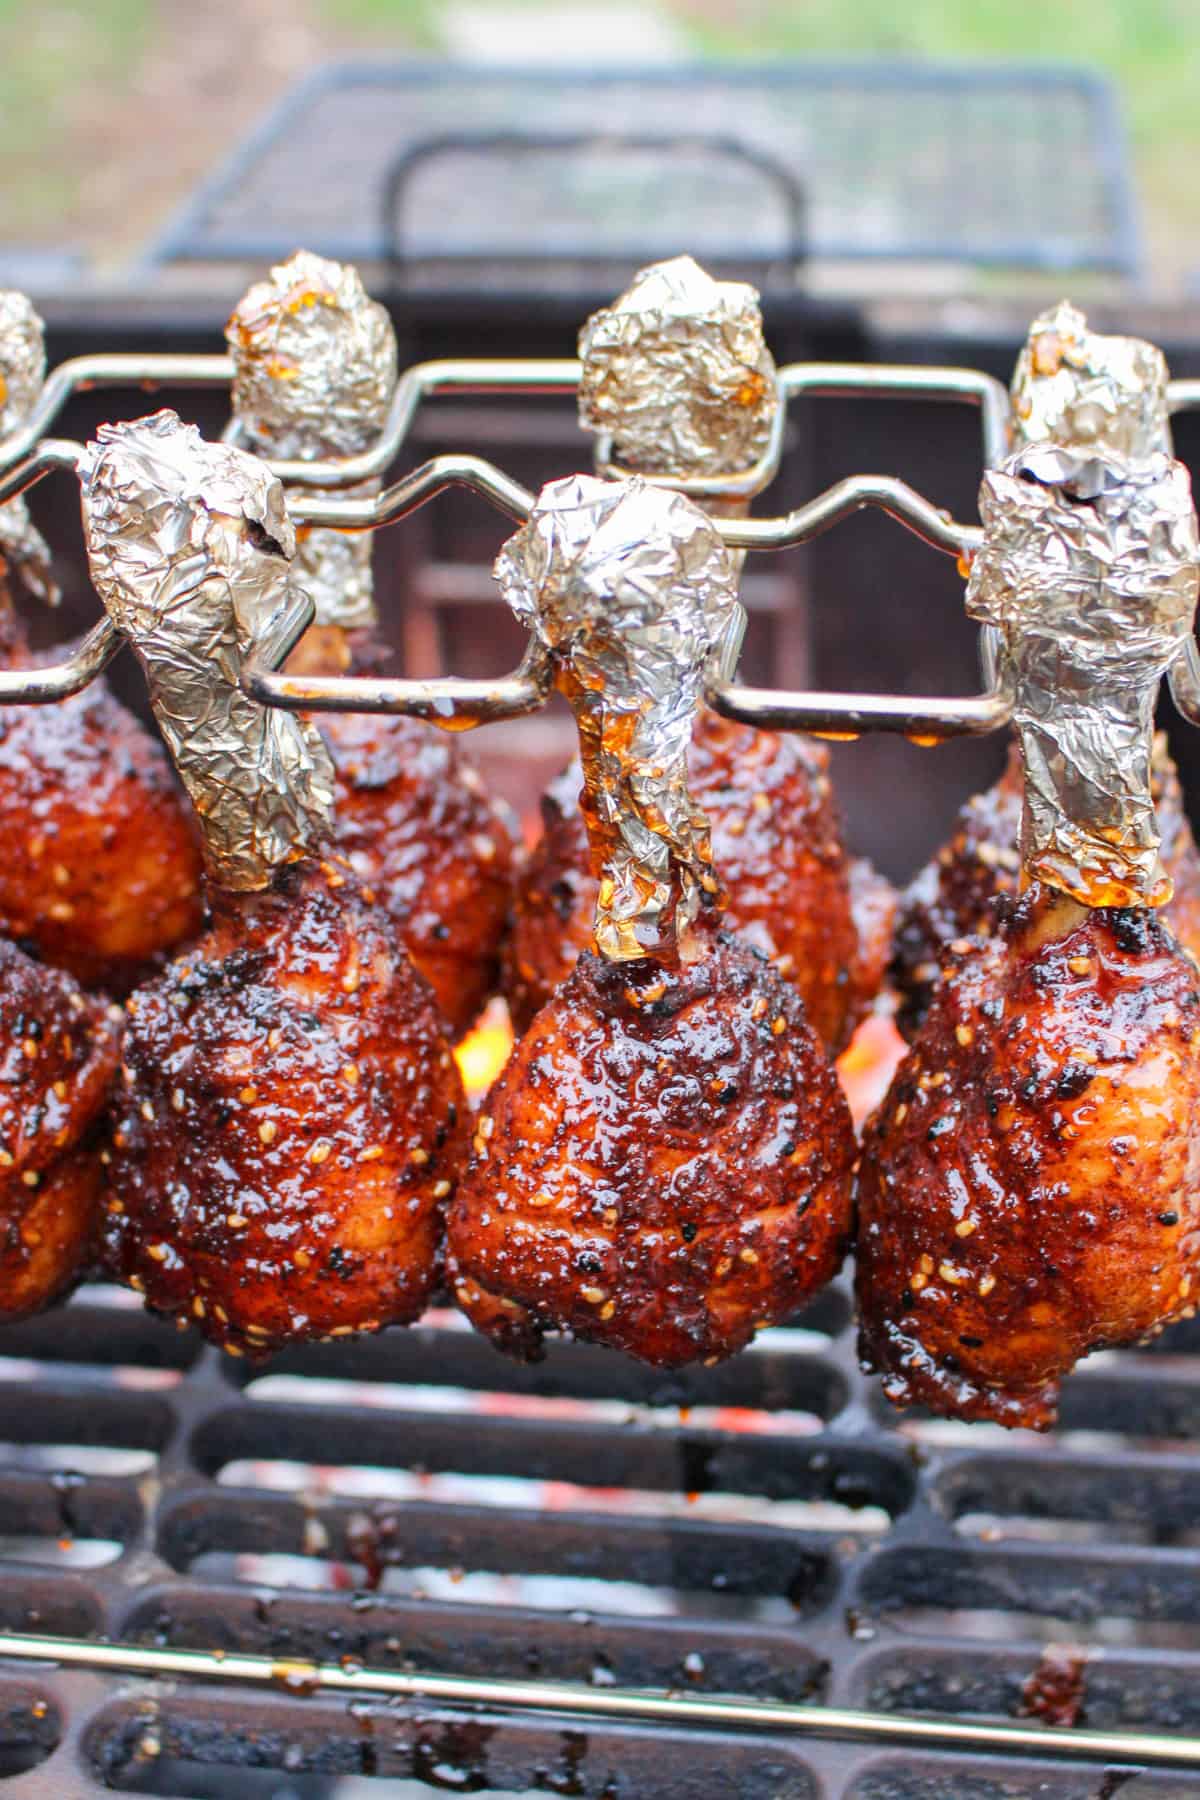 A close up shot of the glazed chicken.